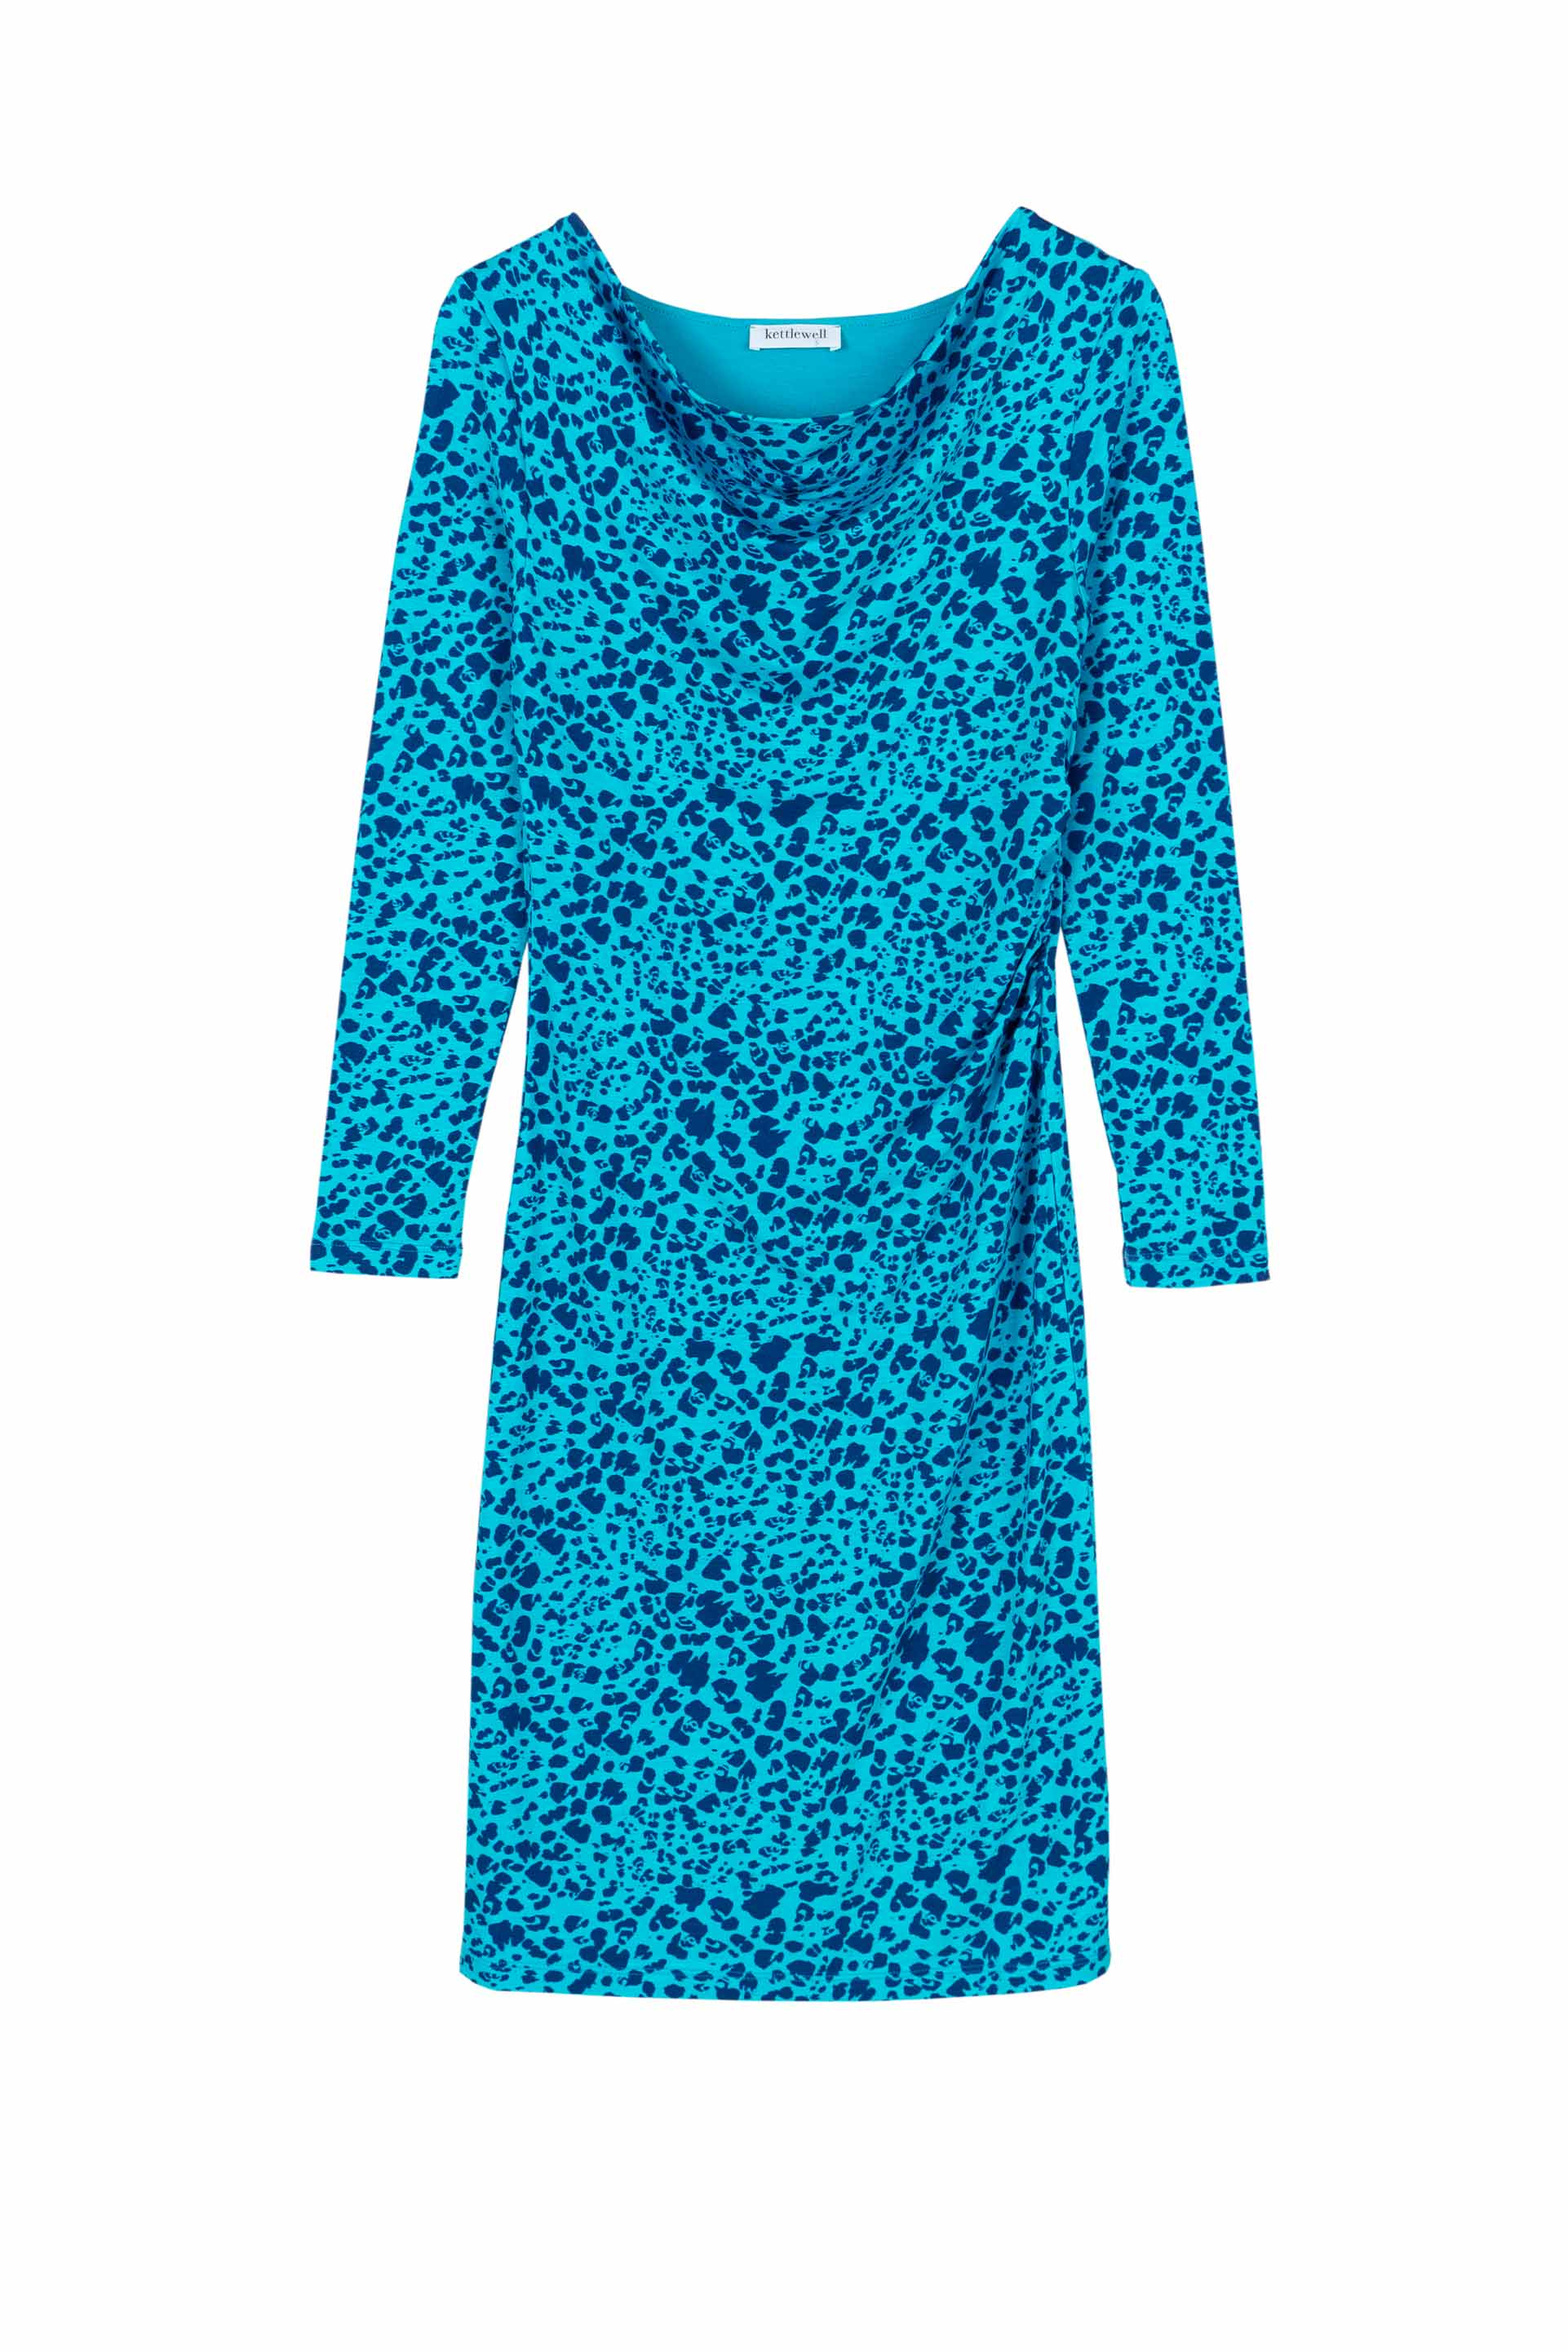 6546_cowl_neck_dress_turquoise_and_bright_navy.jpg